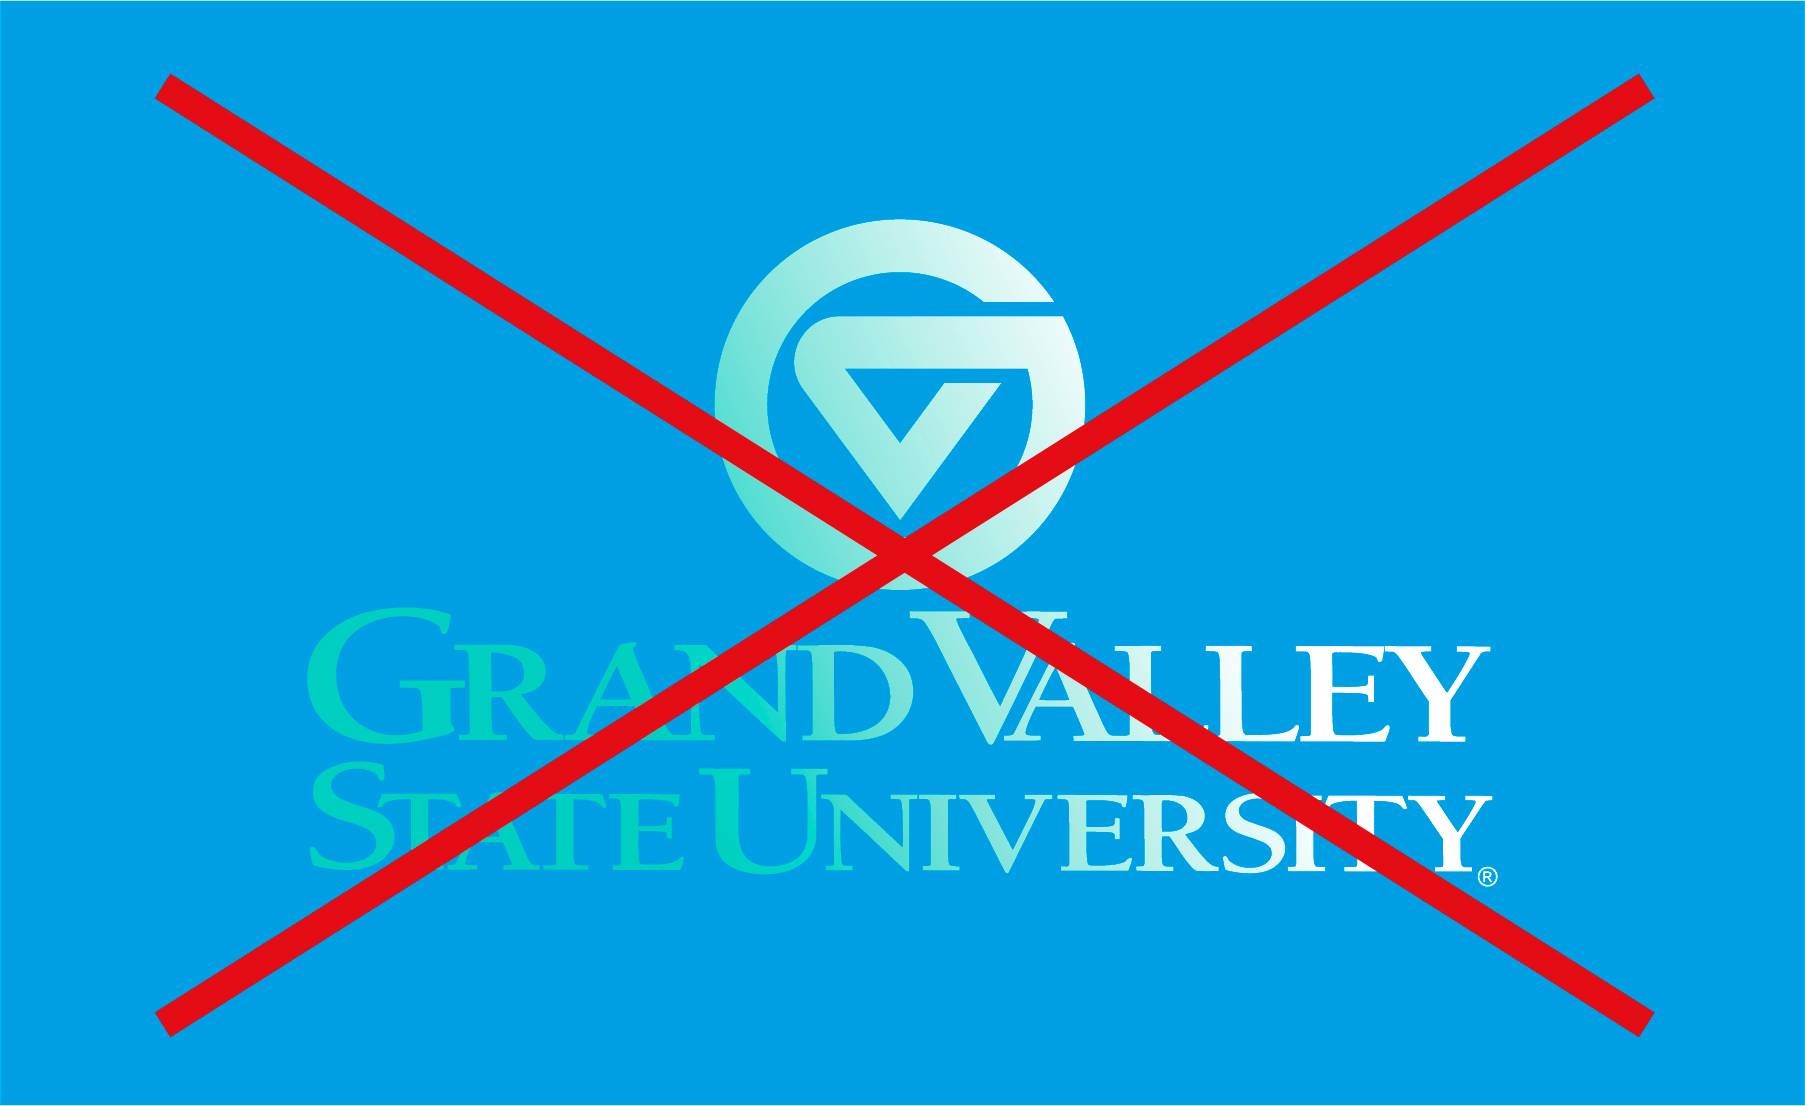 A Grand Valley logo with a teal and white gradient applied to it, overlaid by a red X.